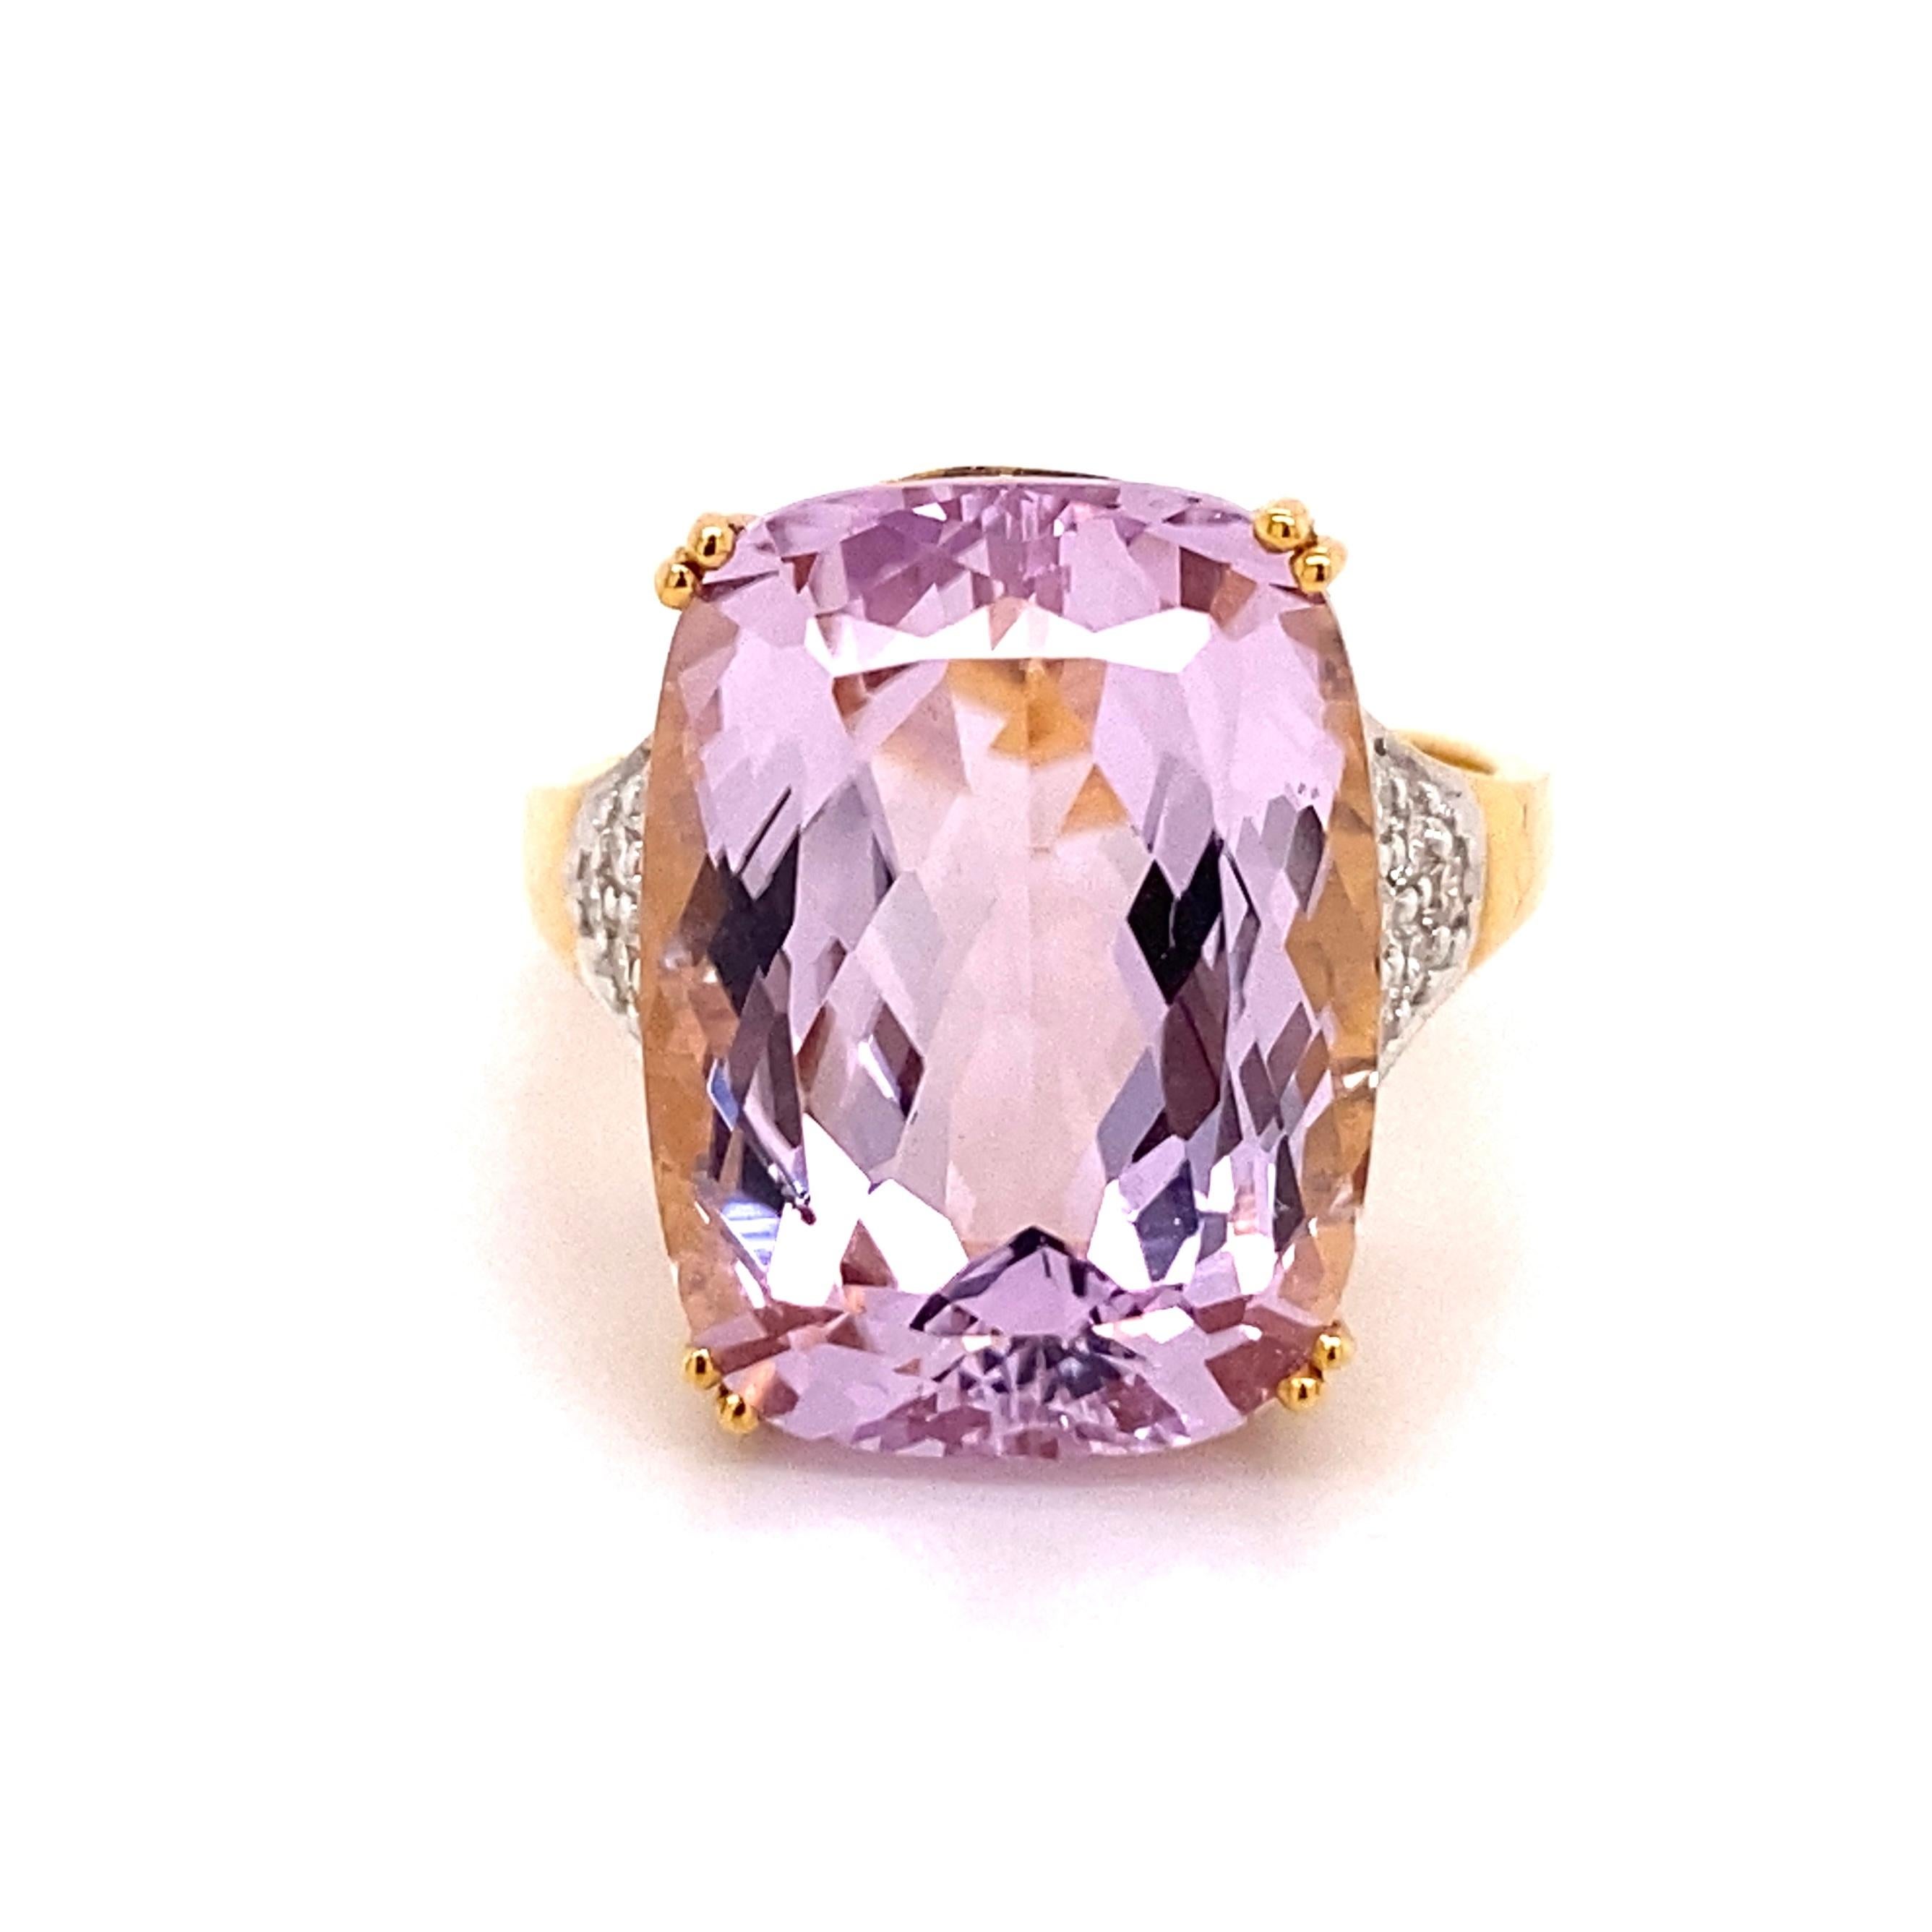 10.09 Carat Cushion Kunzite Diamond Solitaire Gold Cocktail Ring Estate Jewelry In Excellent Condition For Sale In Montreal, QC